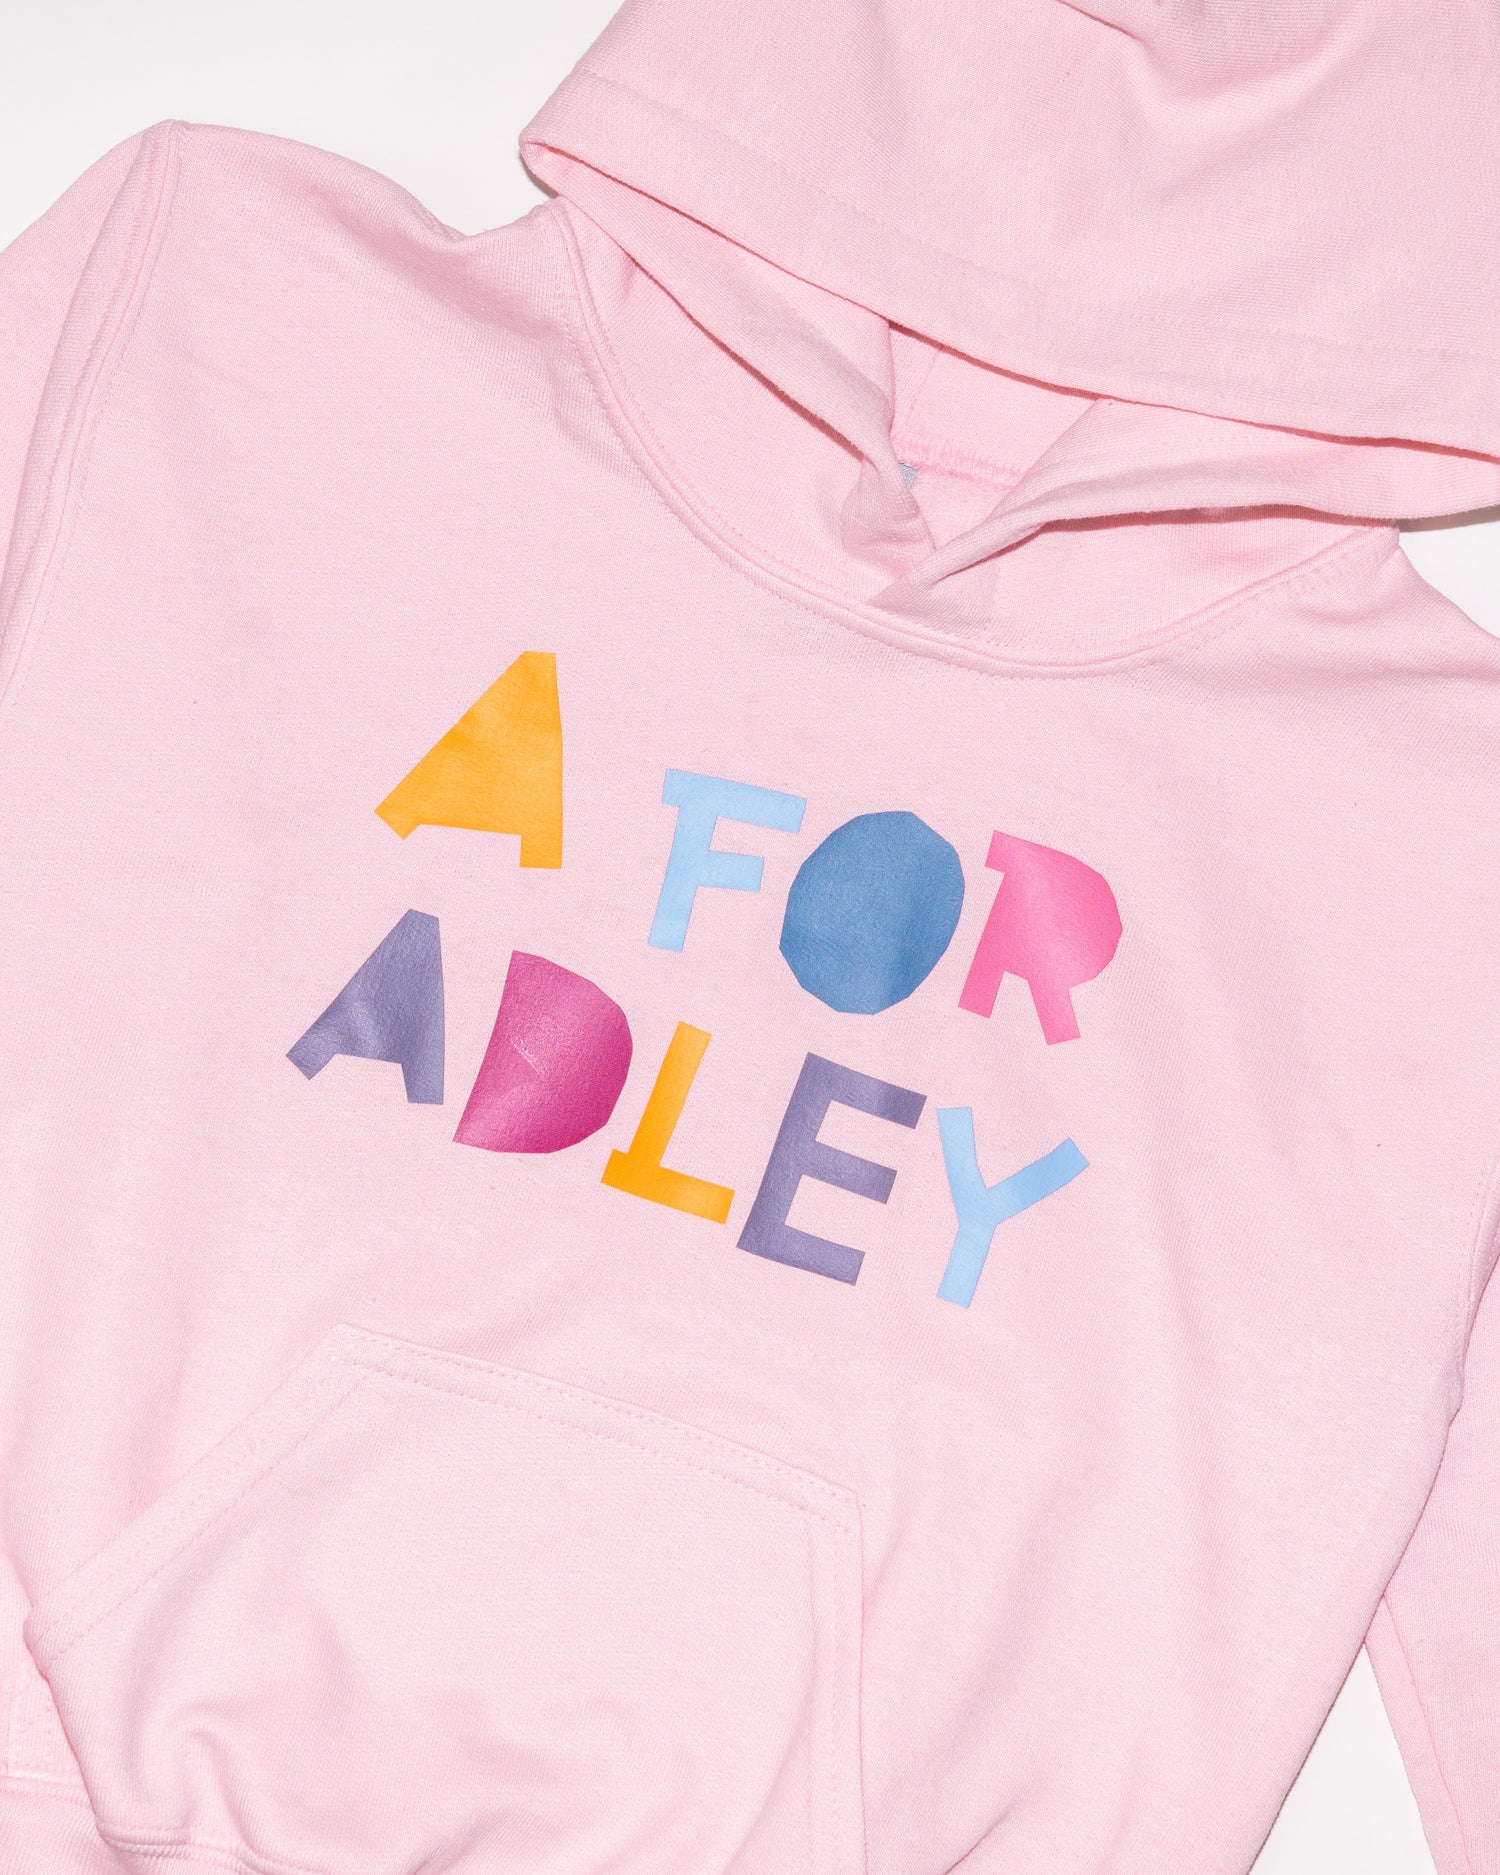 A for Adley BFF Rainbow Hoodie (light pink)